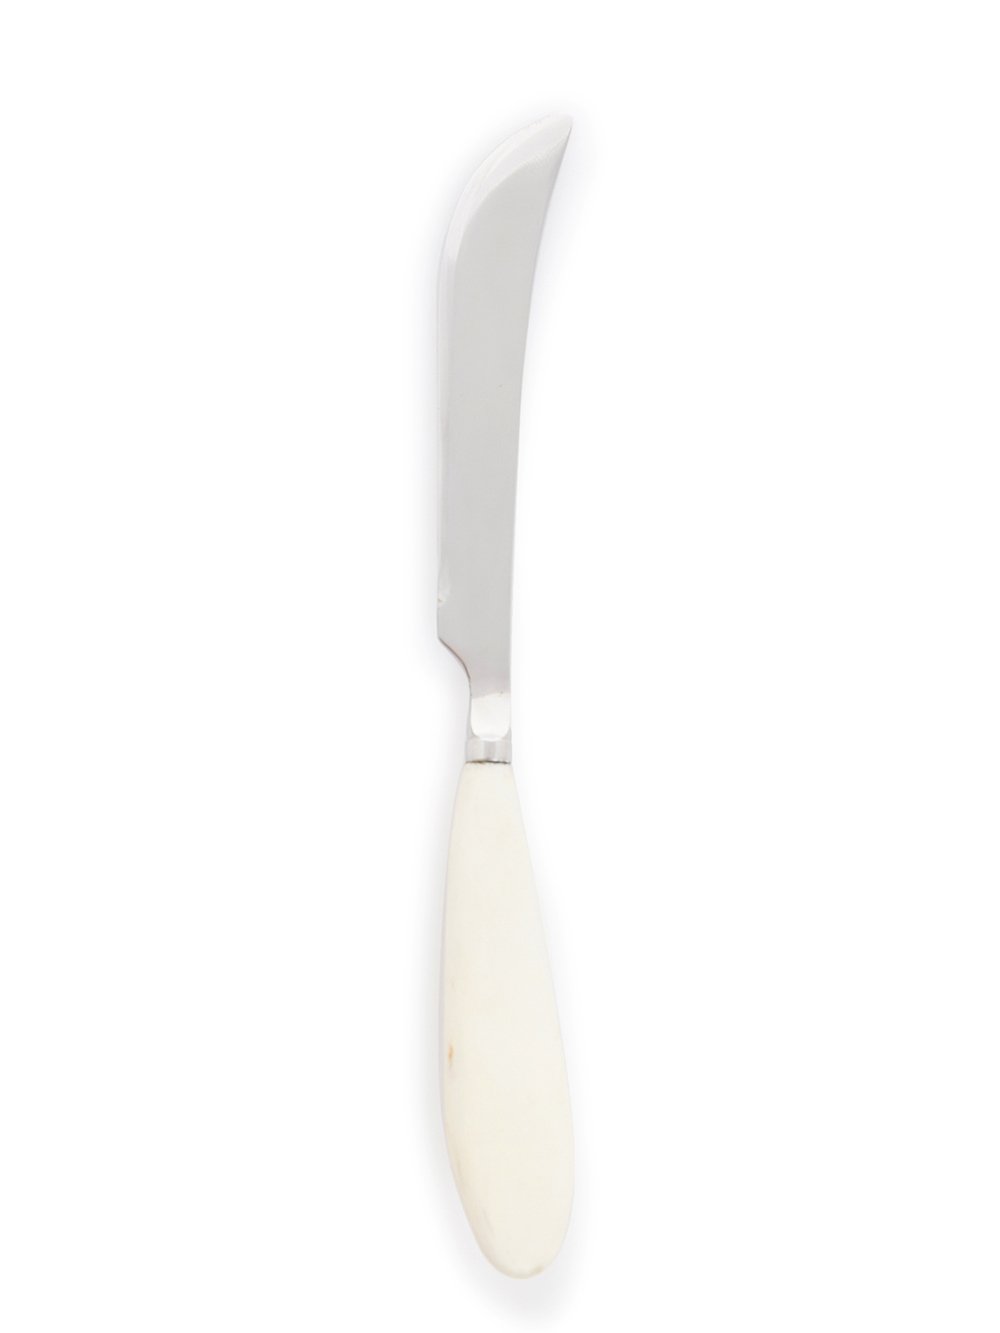 RICK OWENS KNIFE FEATURES A SLIGHTLY CURVED SHARP STERLING TOP AND A MID-LENGTH, NATURAL COLOR BONE HANDLE.